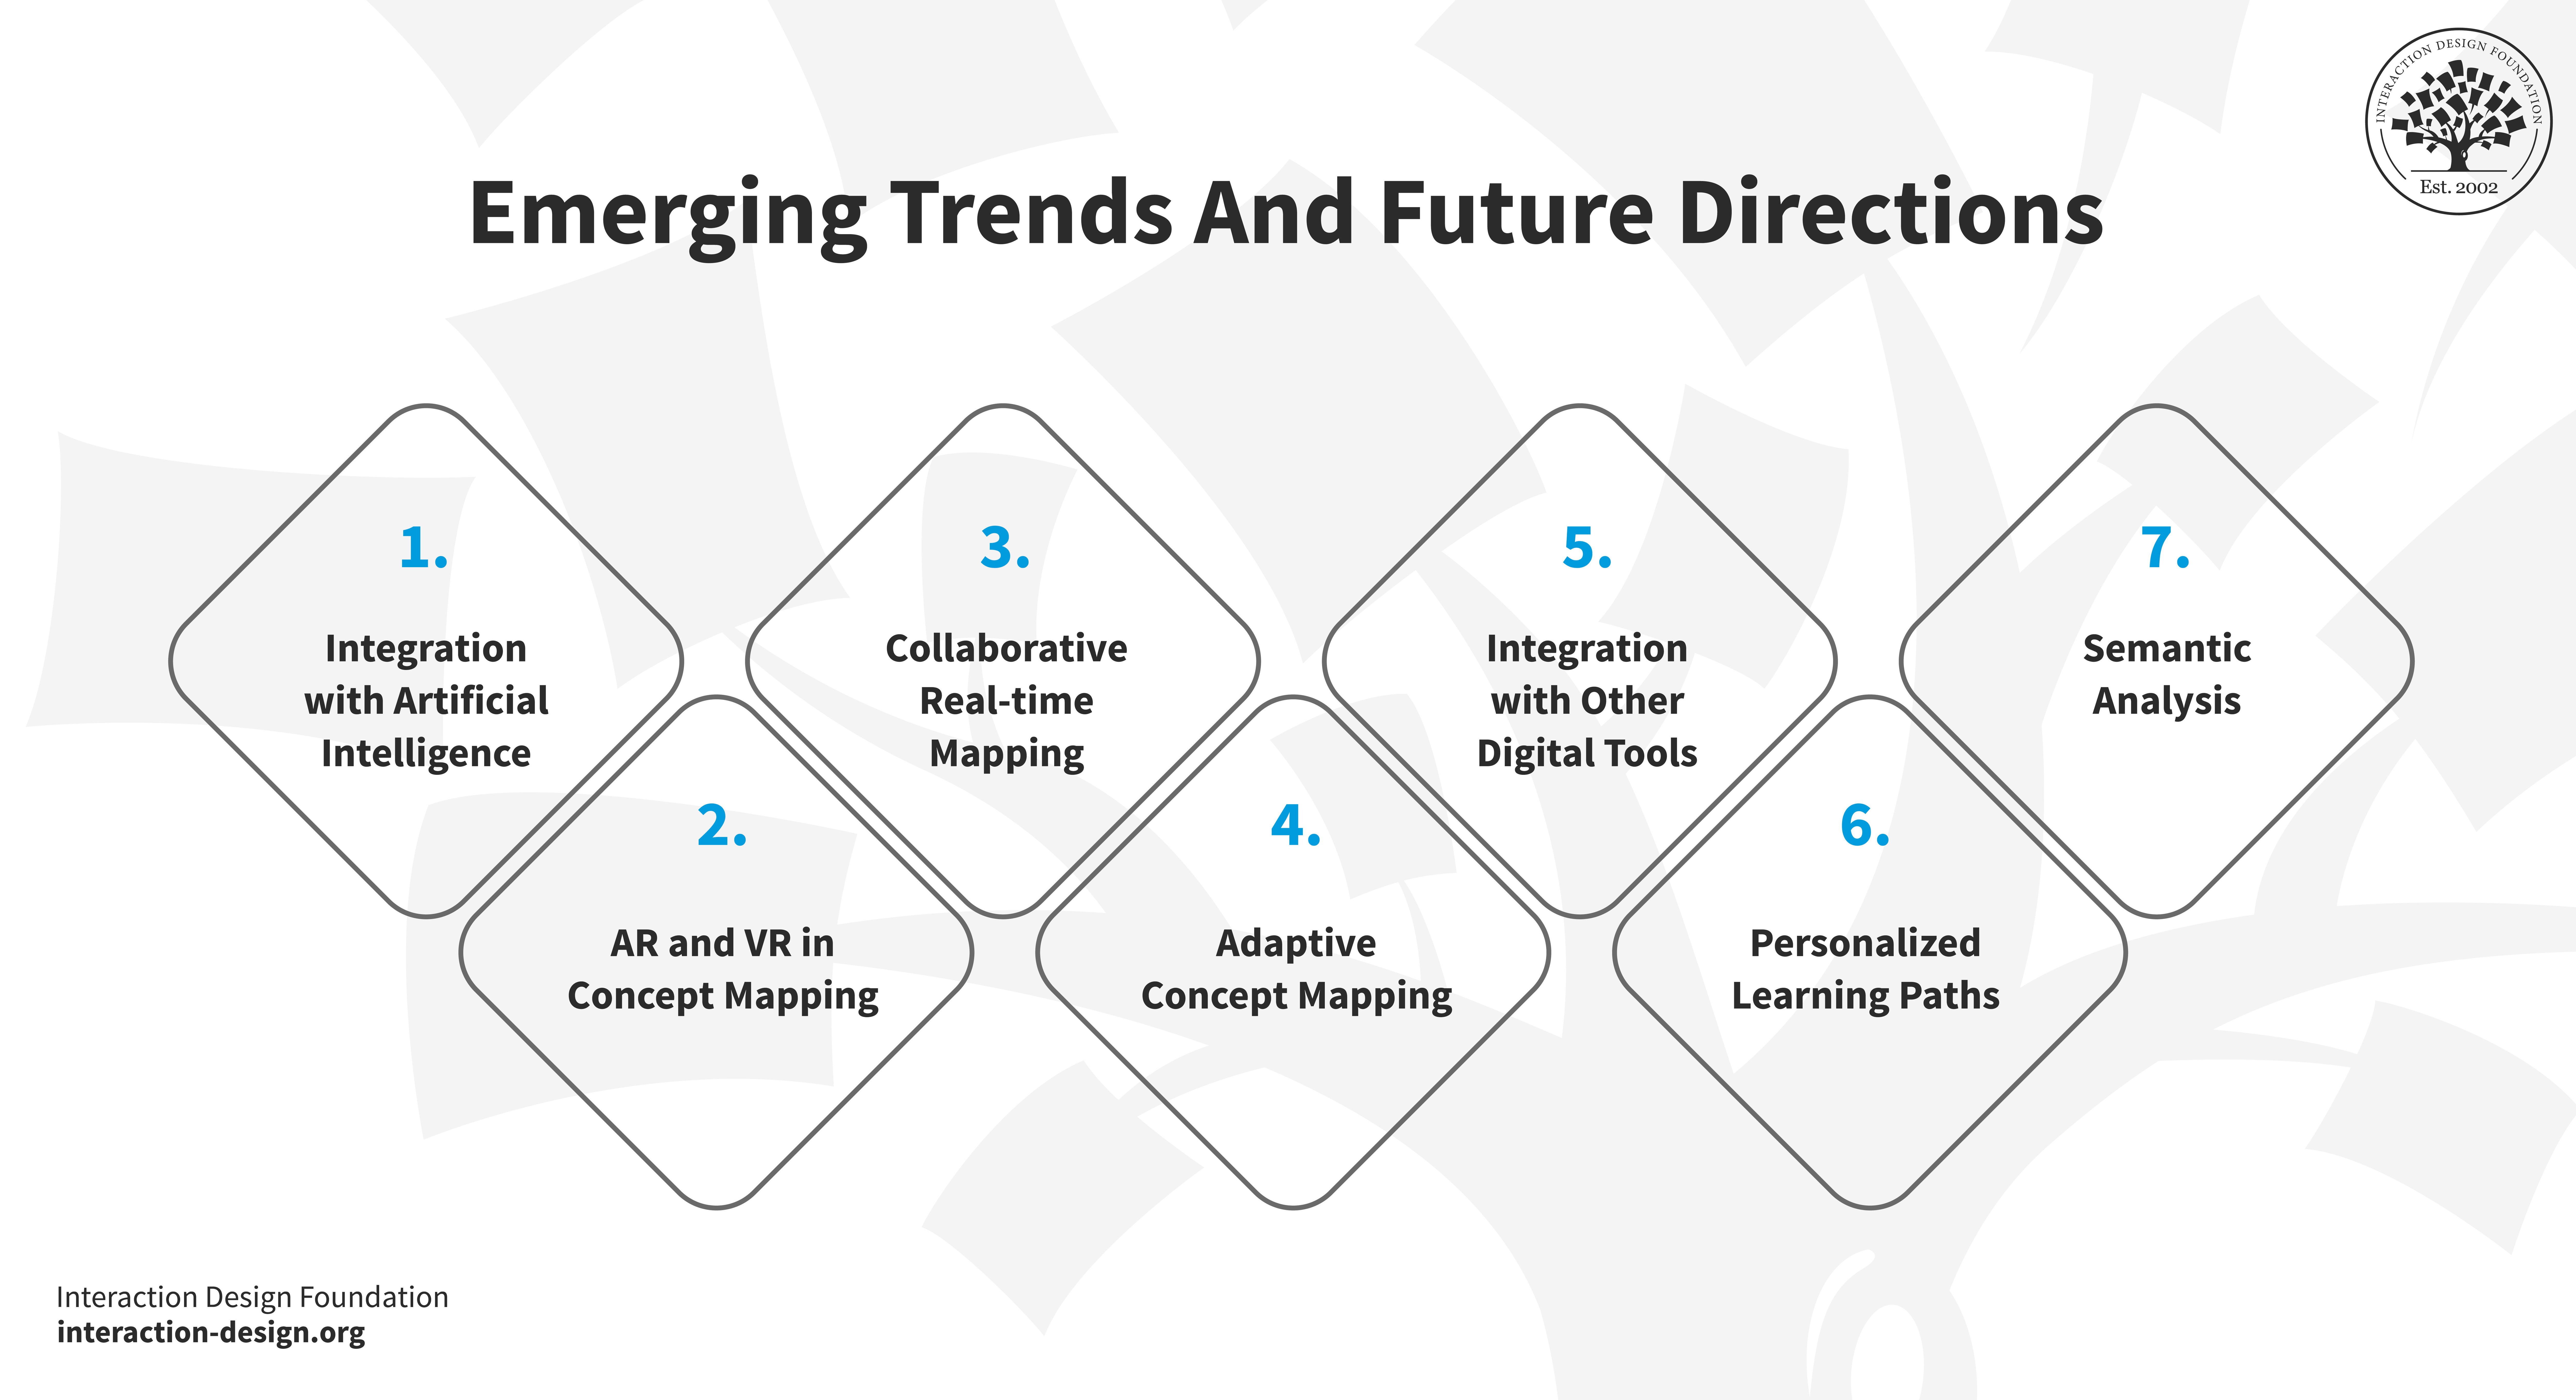 Visual representation of the Emerging Trends and Future Directions